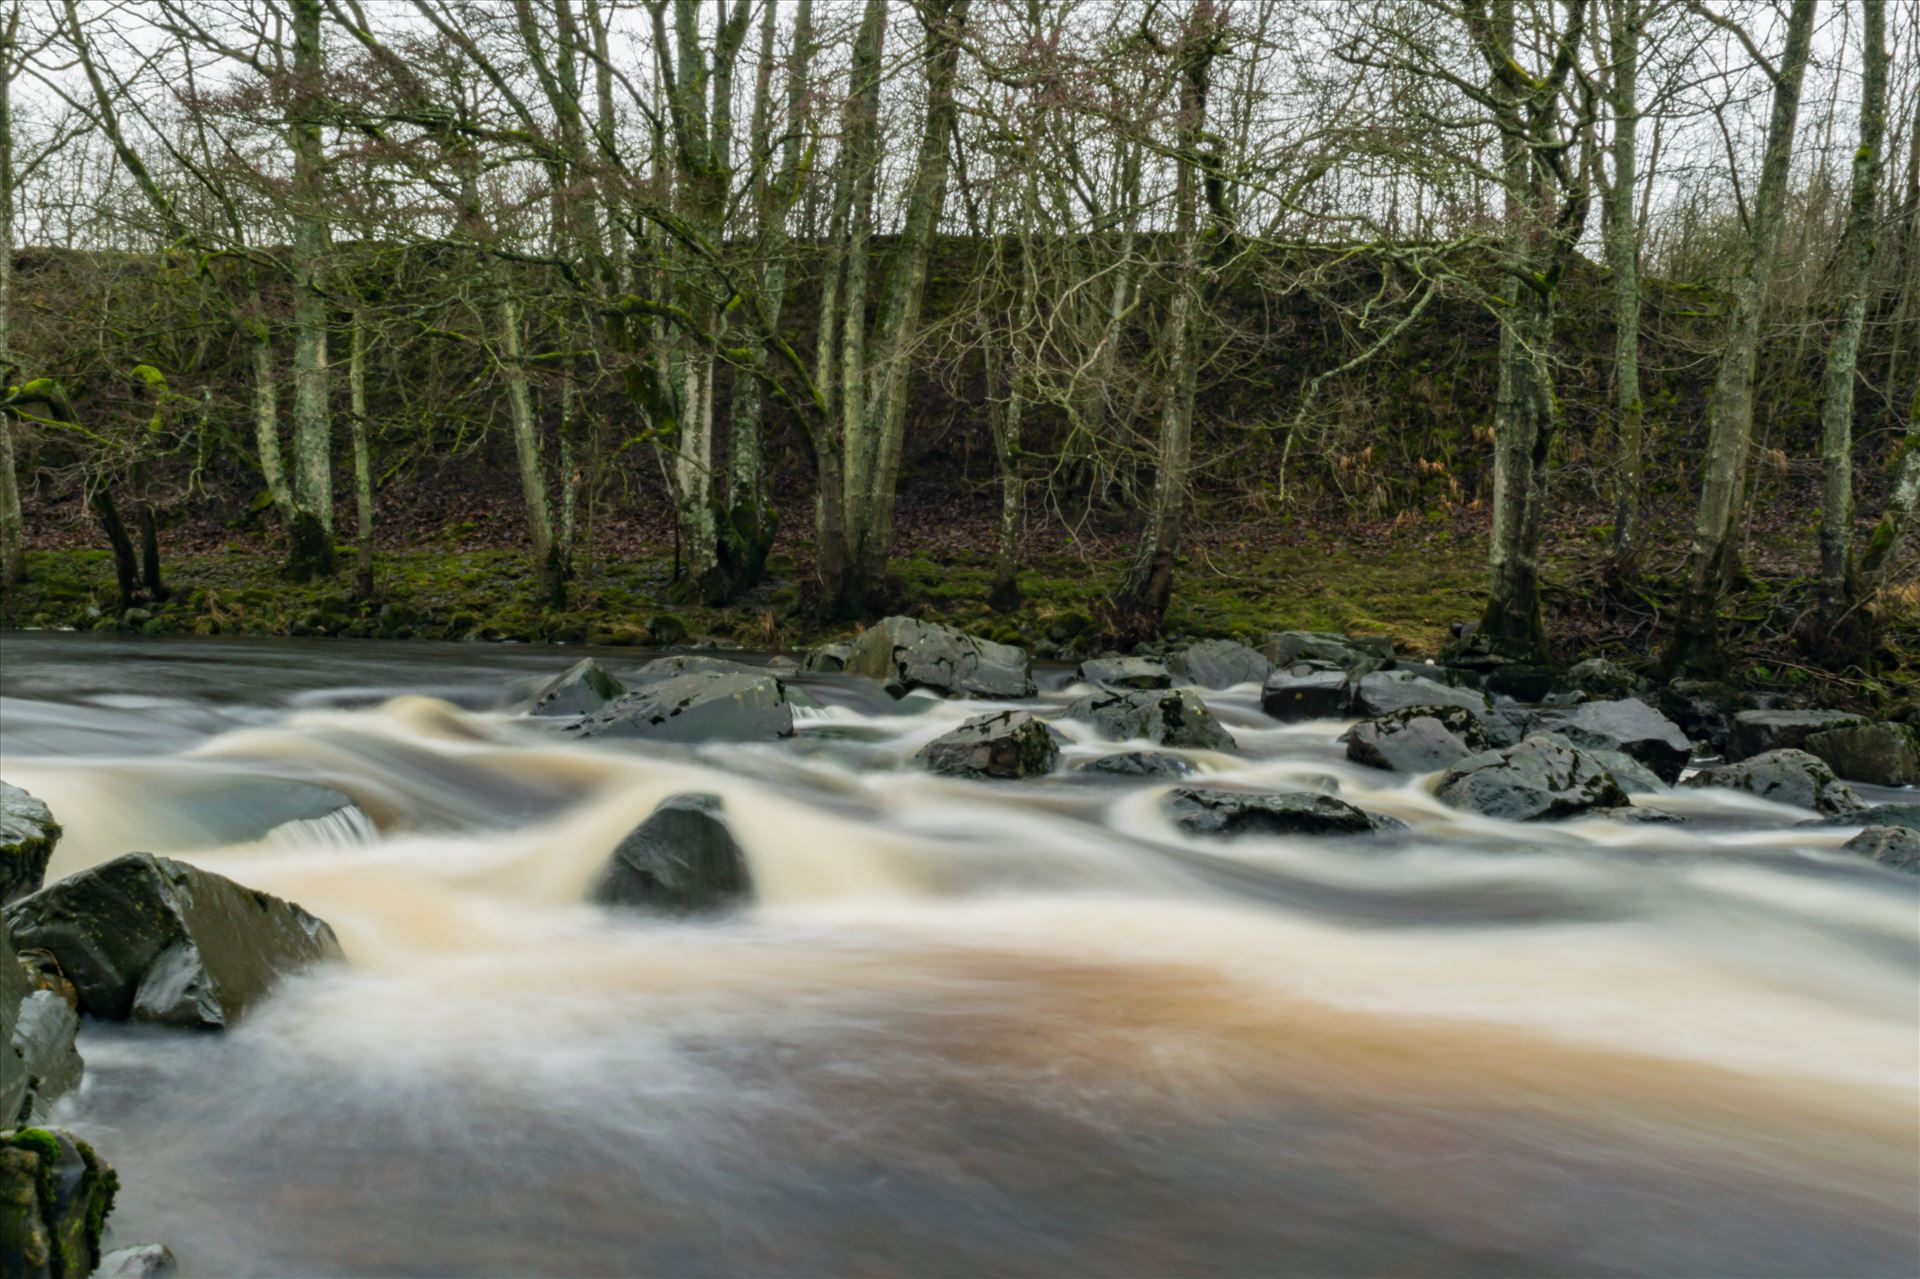 River in Full Flow A river in full flow, taken with a ND filter and a 15 scoond exposure by AJ Stoves Photography